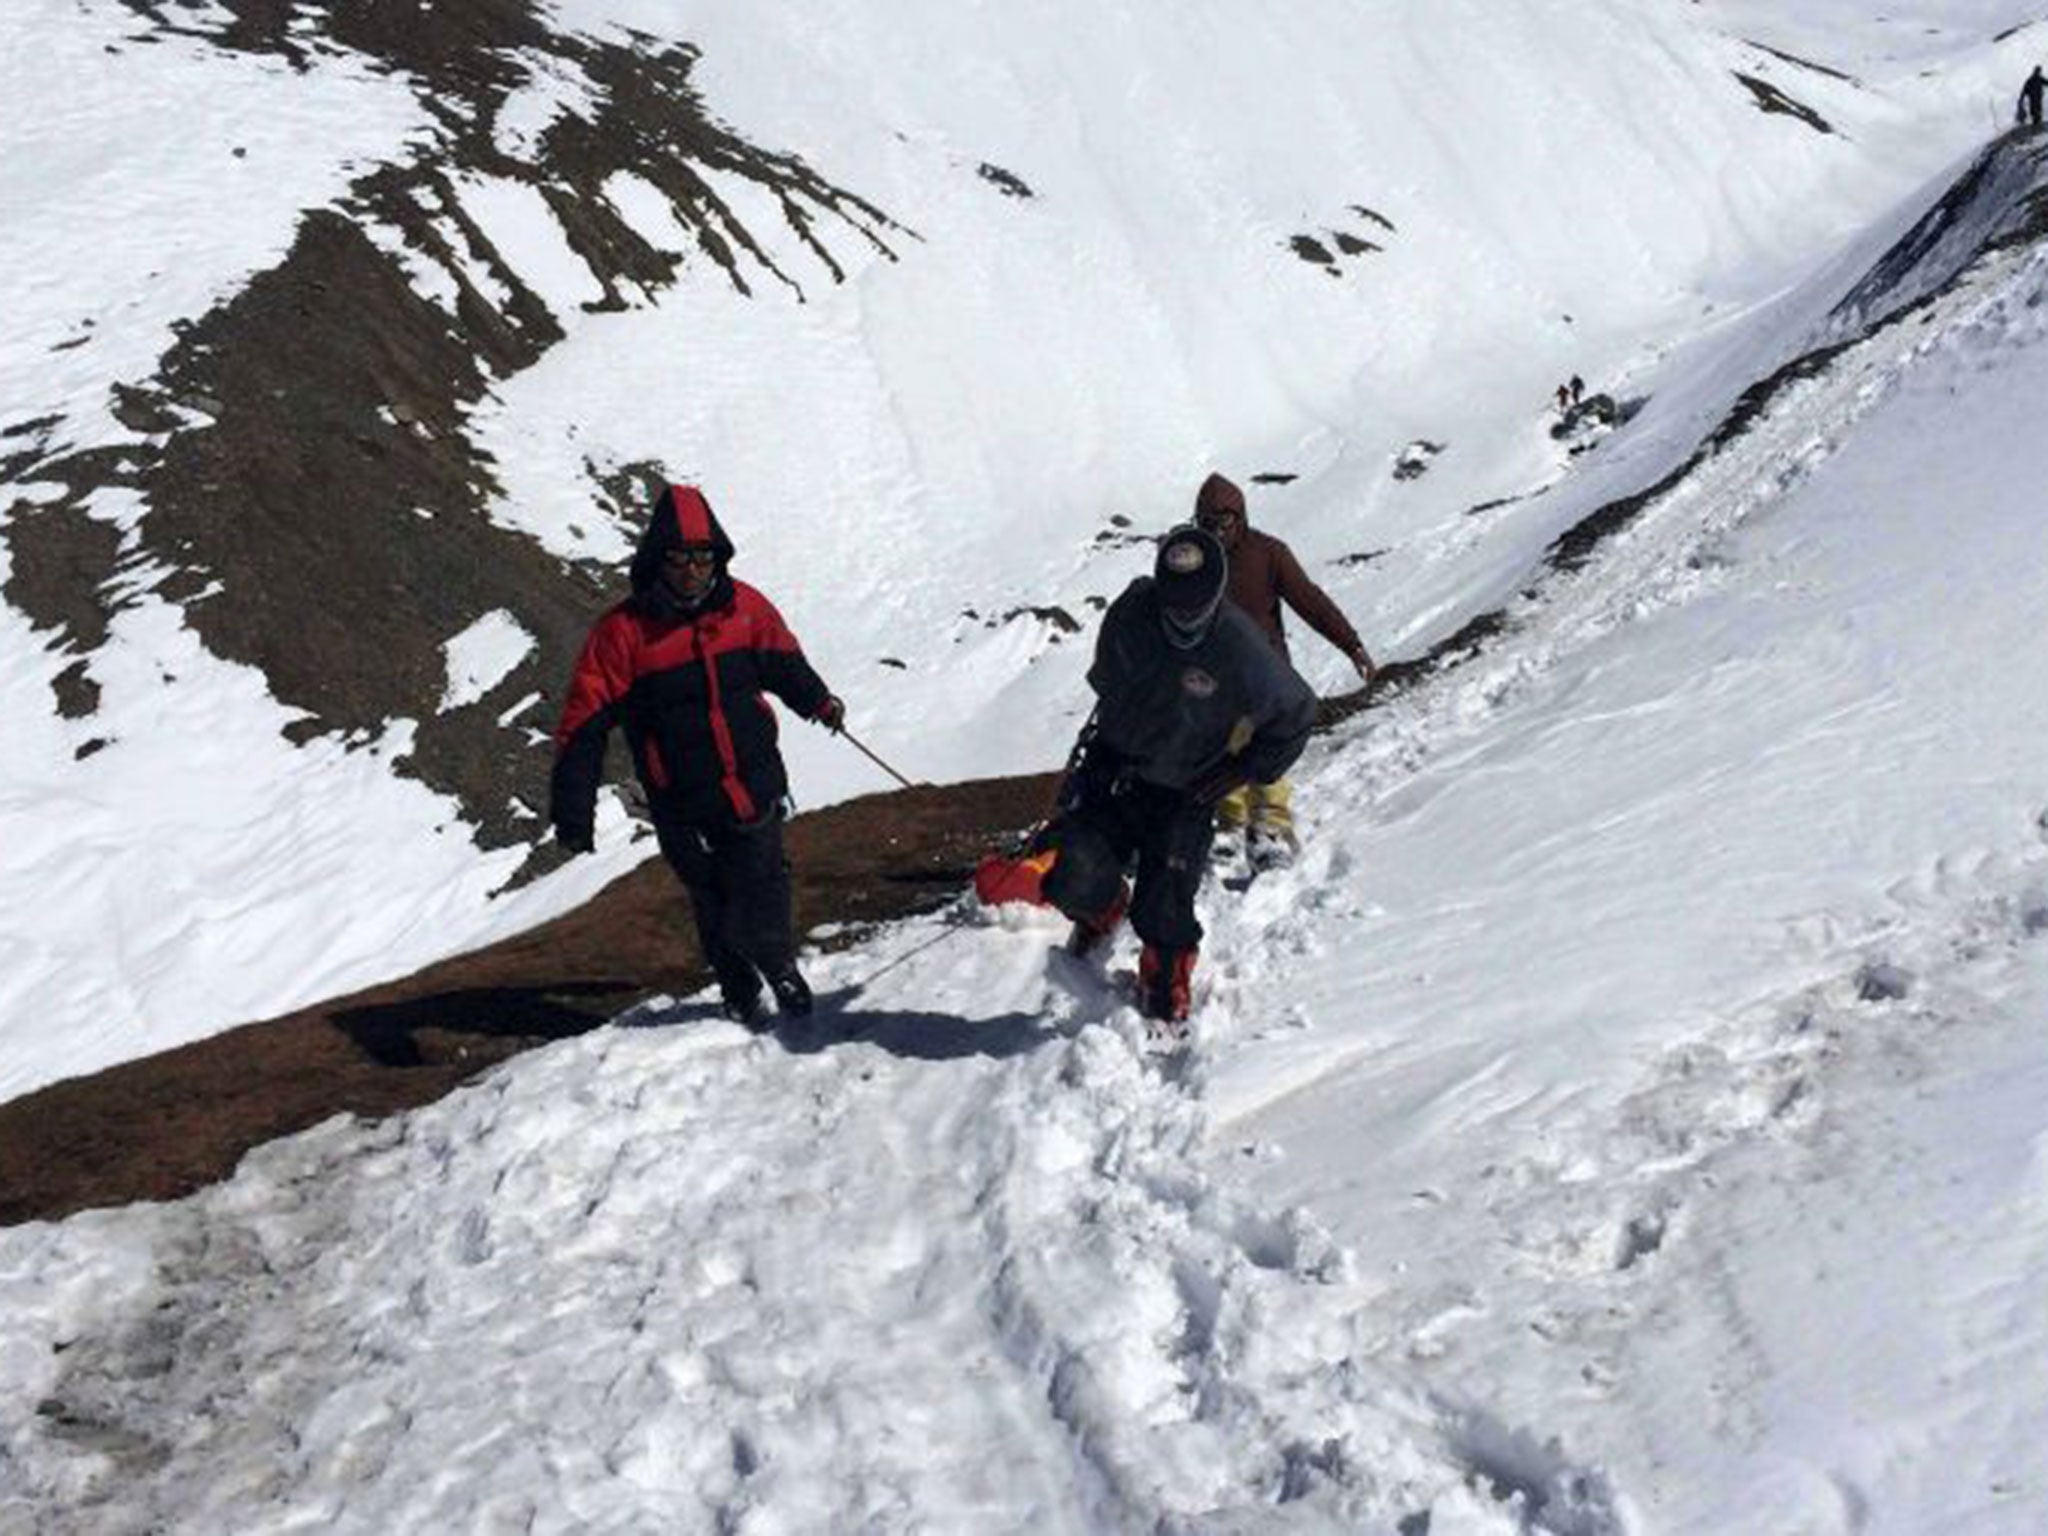 The Nepal Army continues to search for the missing climbers